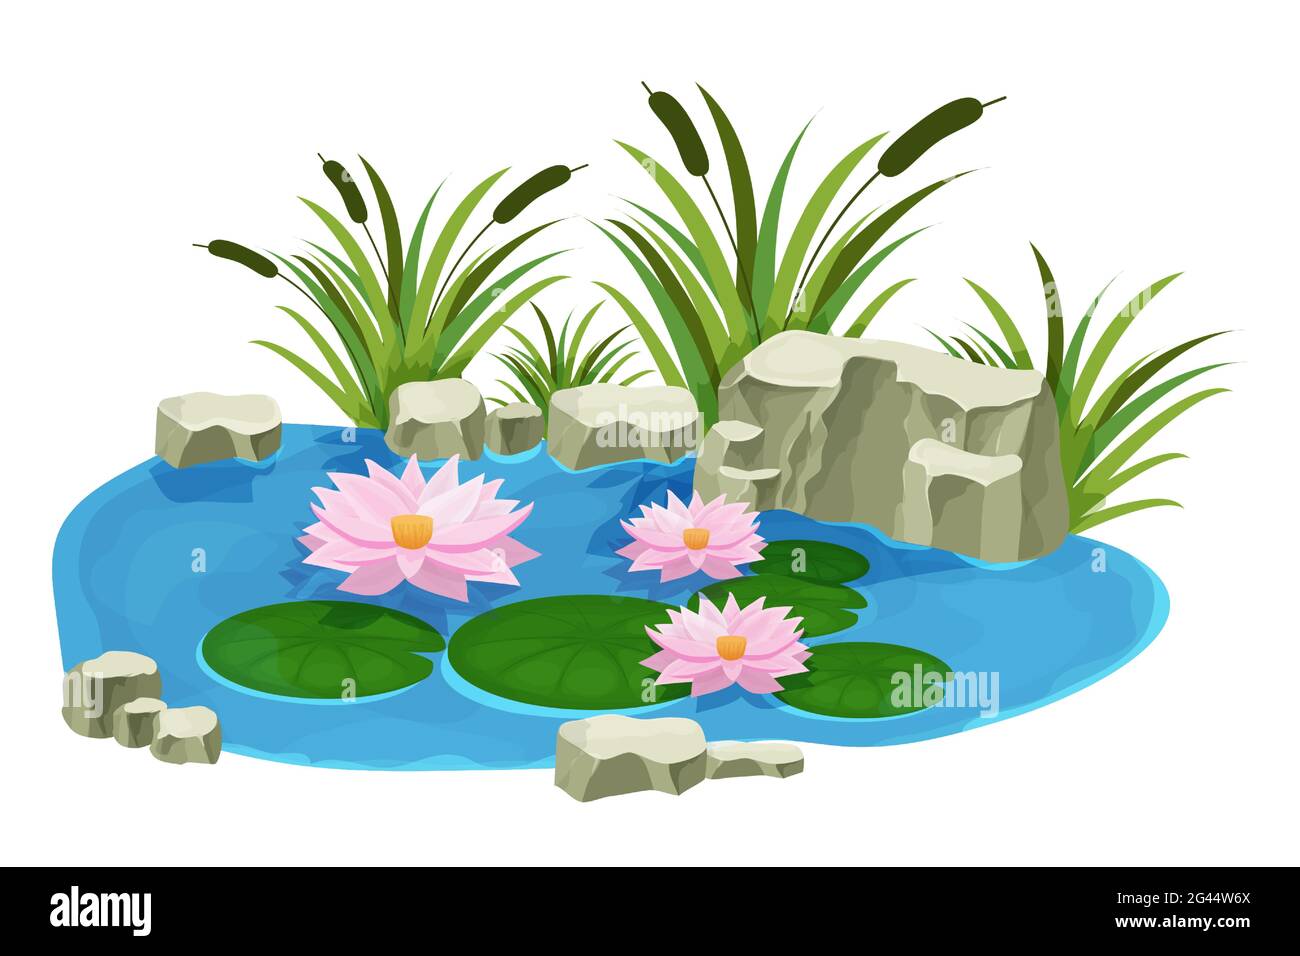 Lake flowers Stock Vector Images - Alamy